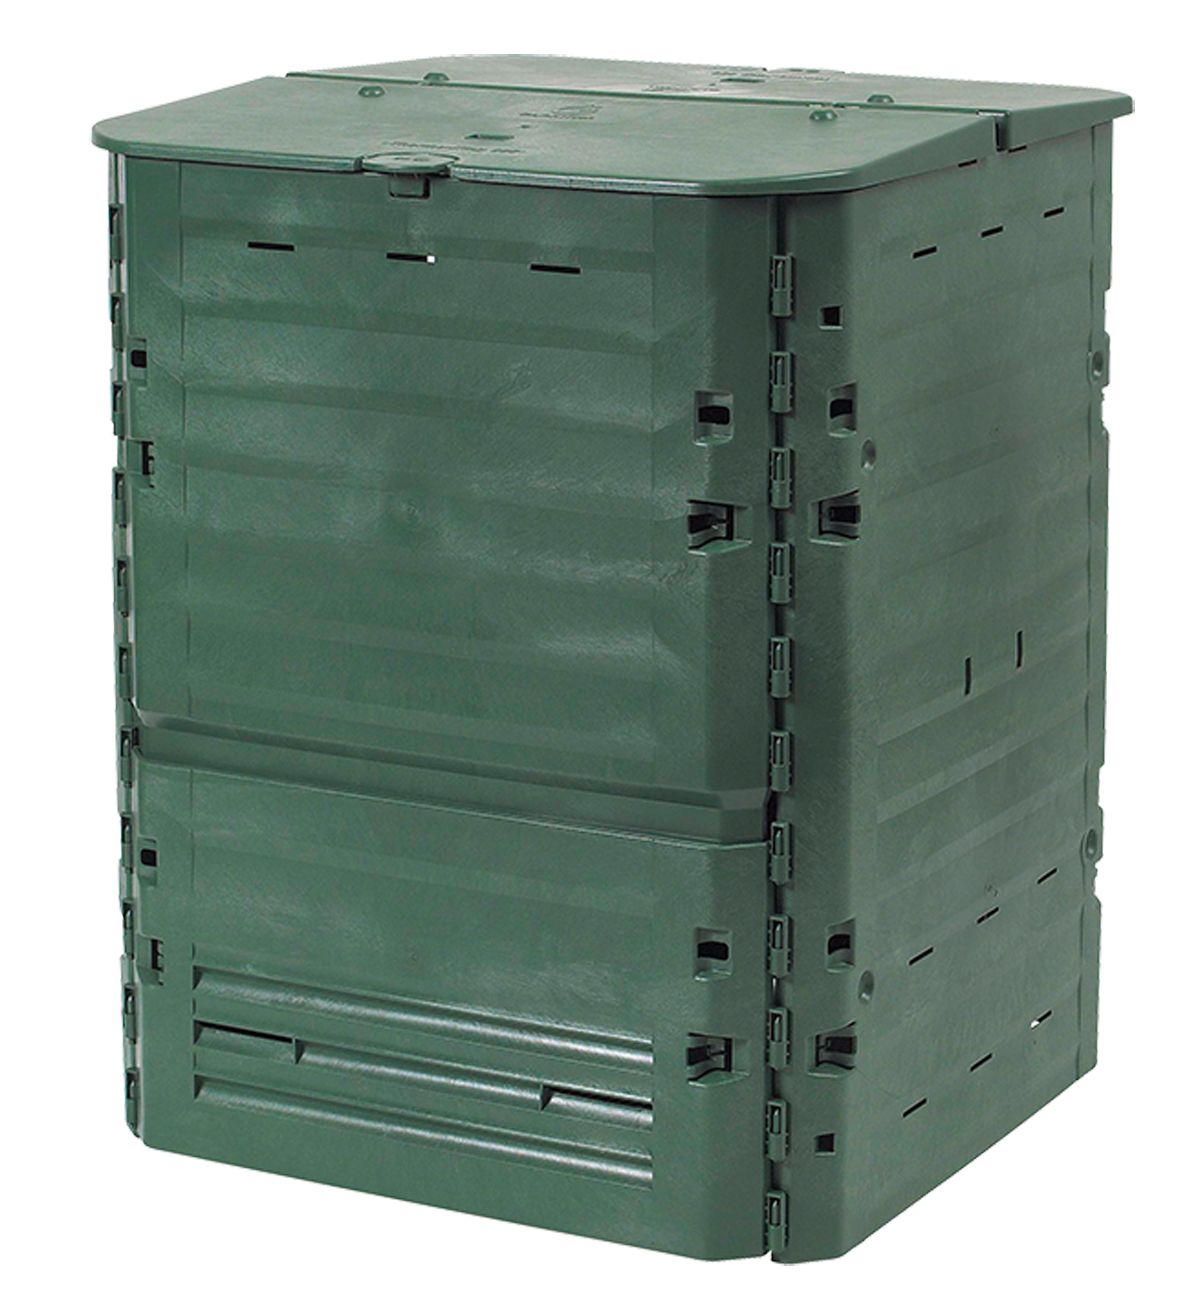 PatioPlus Small Thermo King Composter